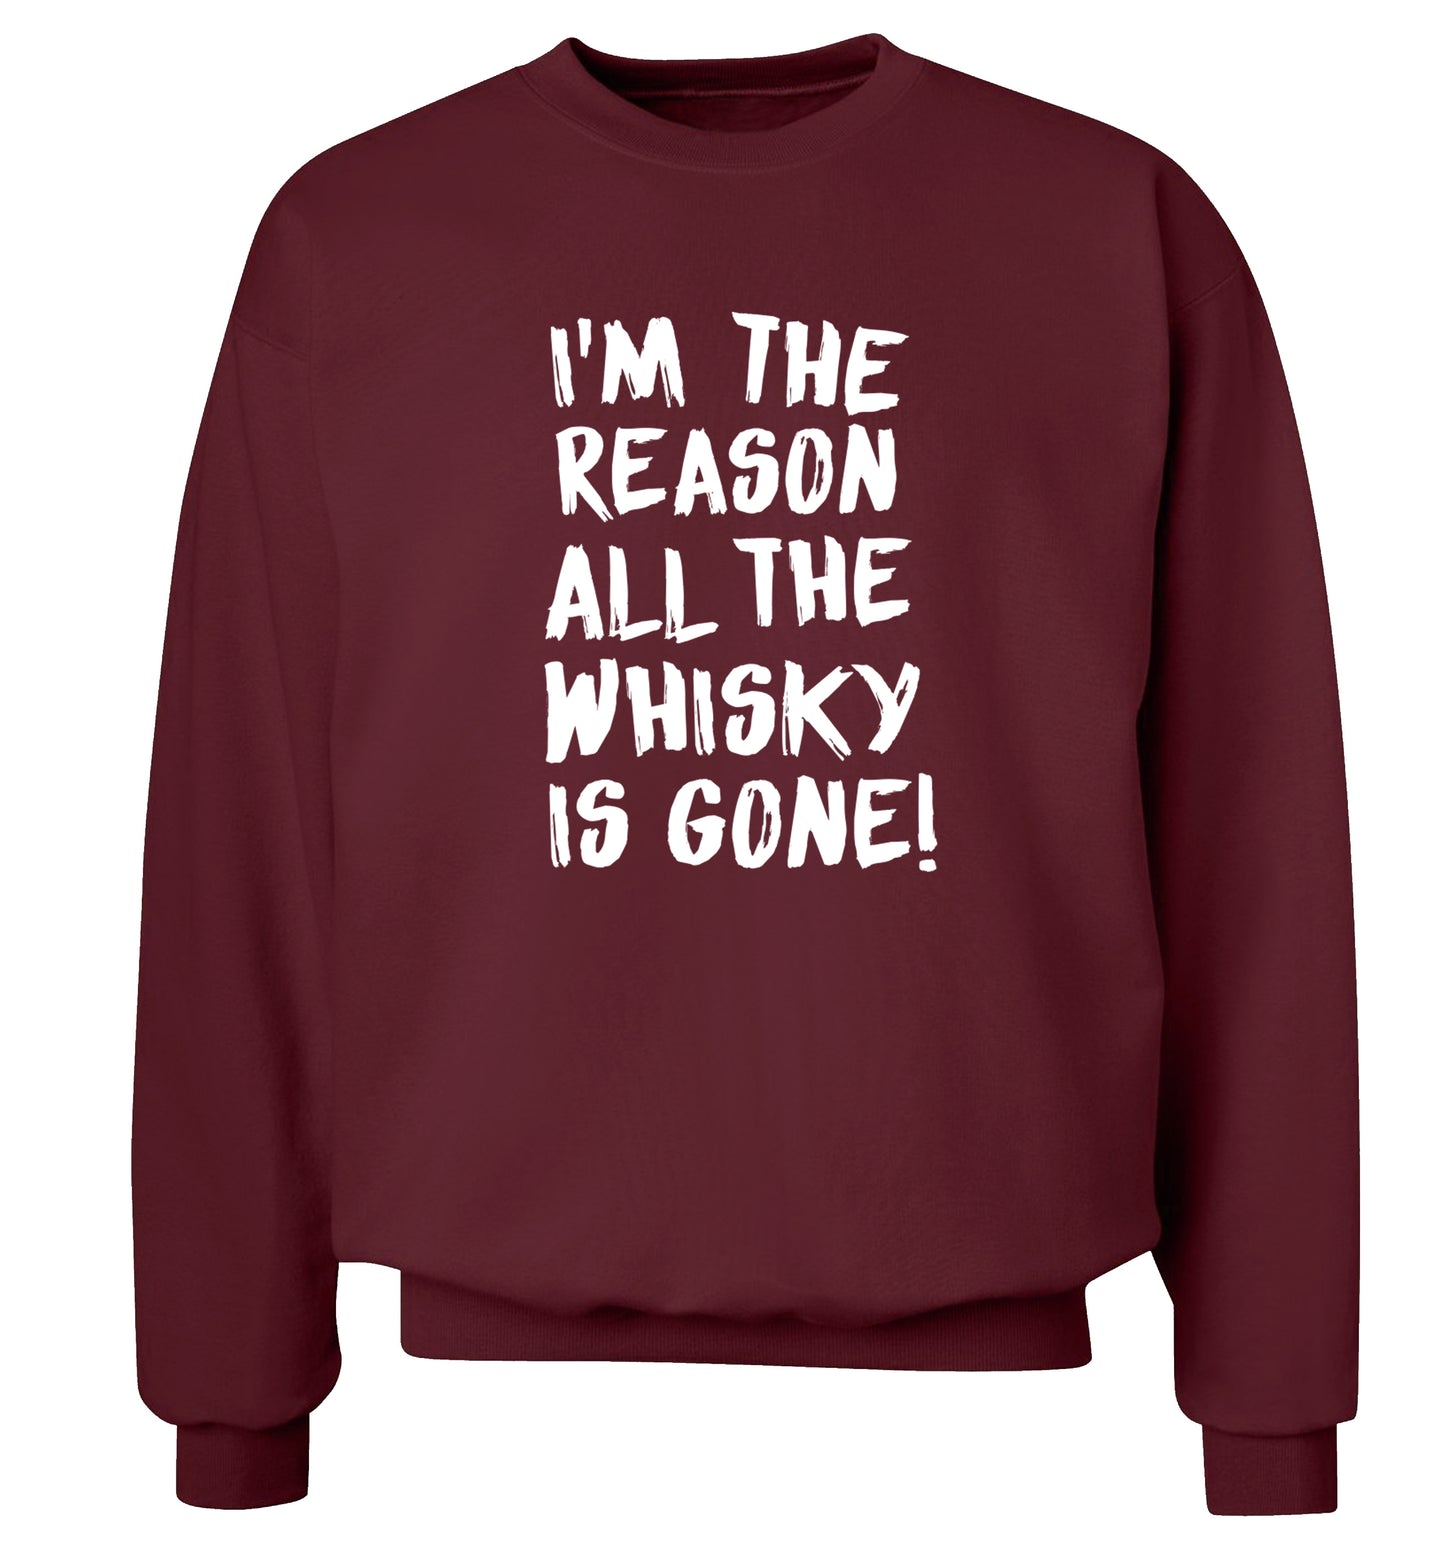 I'm the reason all the whisky is gone Adult's unisex maroon Sweater 2XL